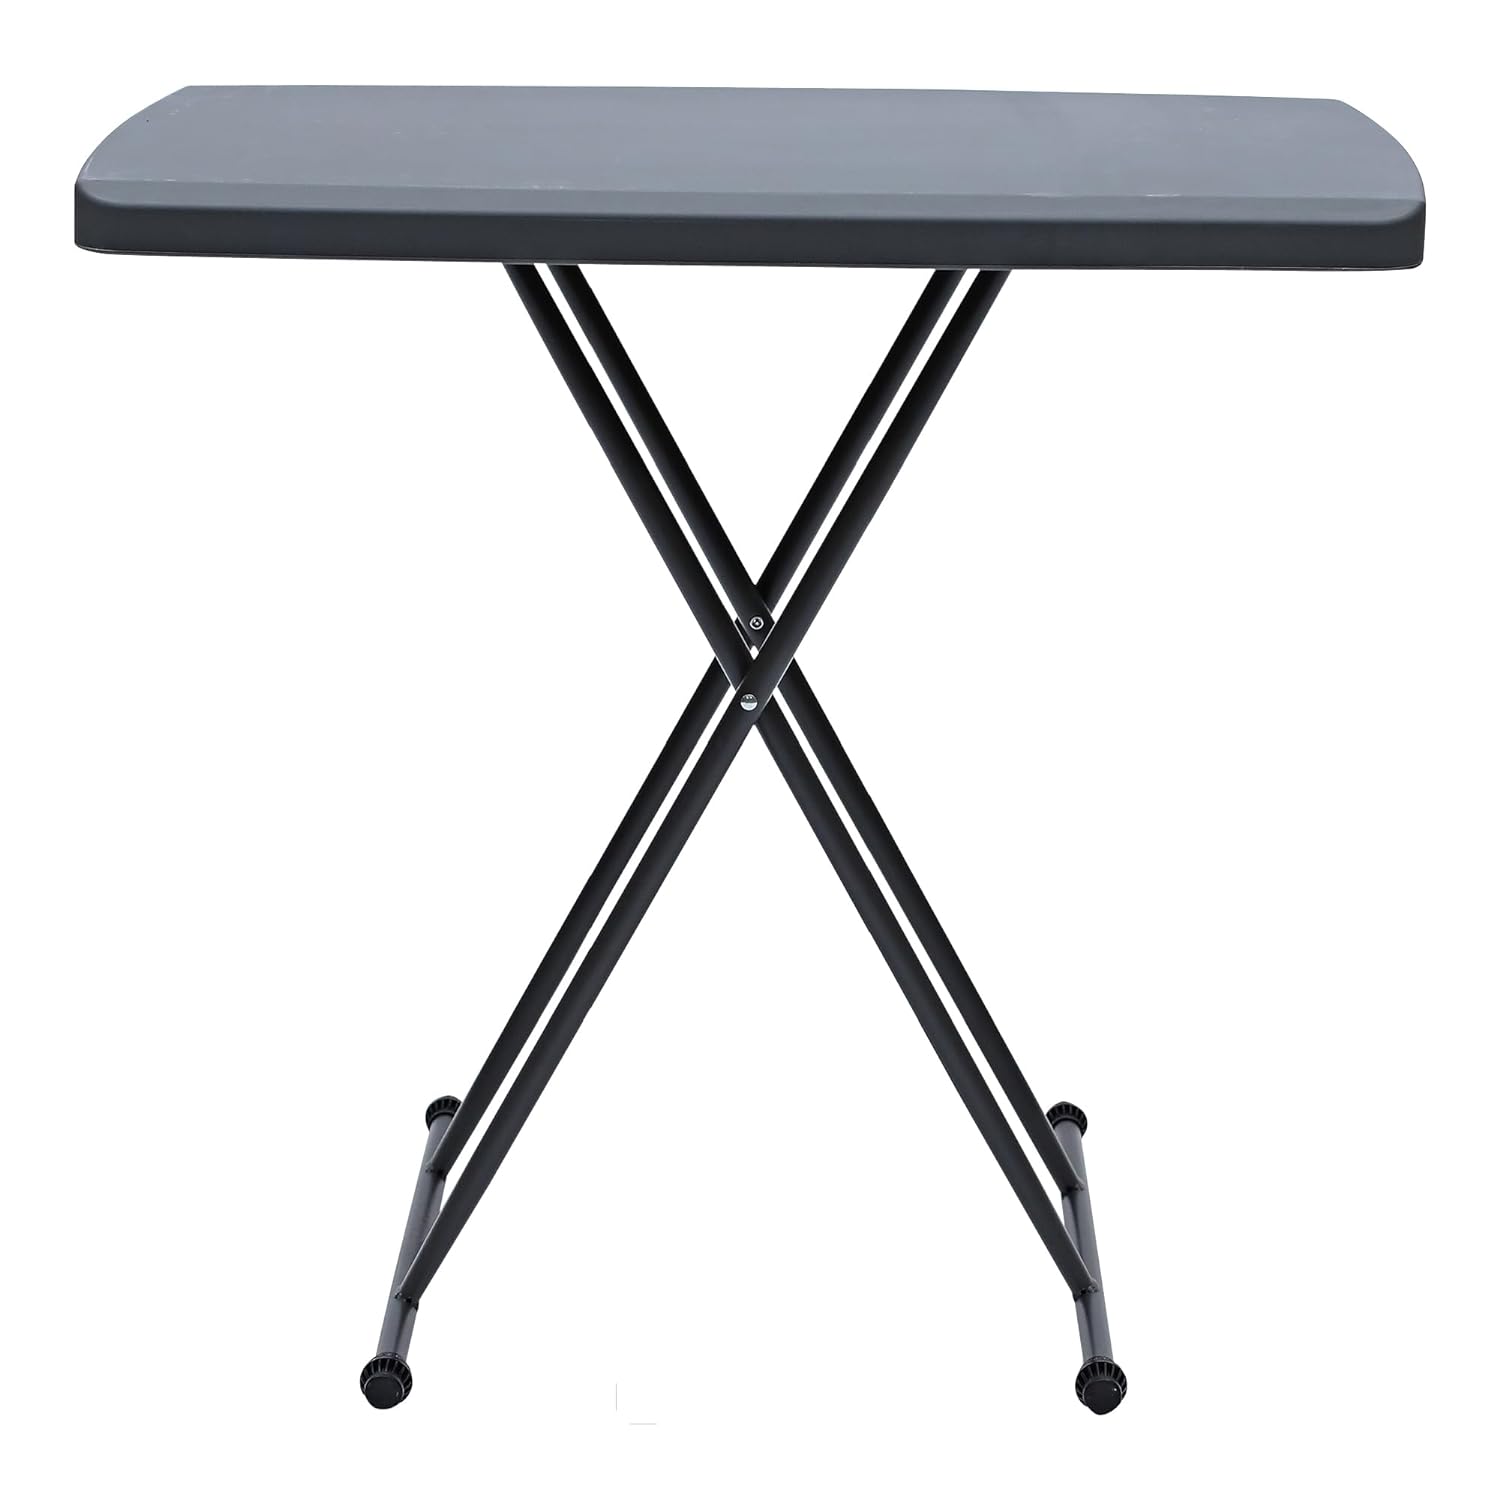 Iceberg IndestrucTable Classic Personal Folding Table